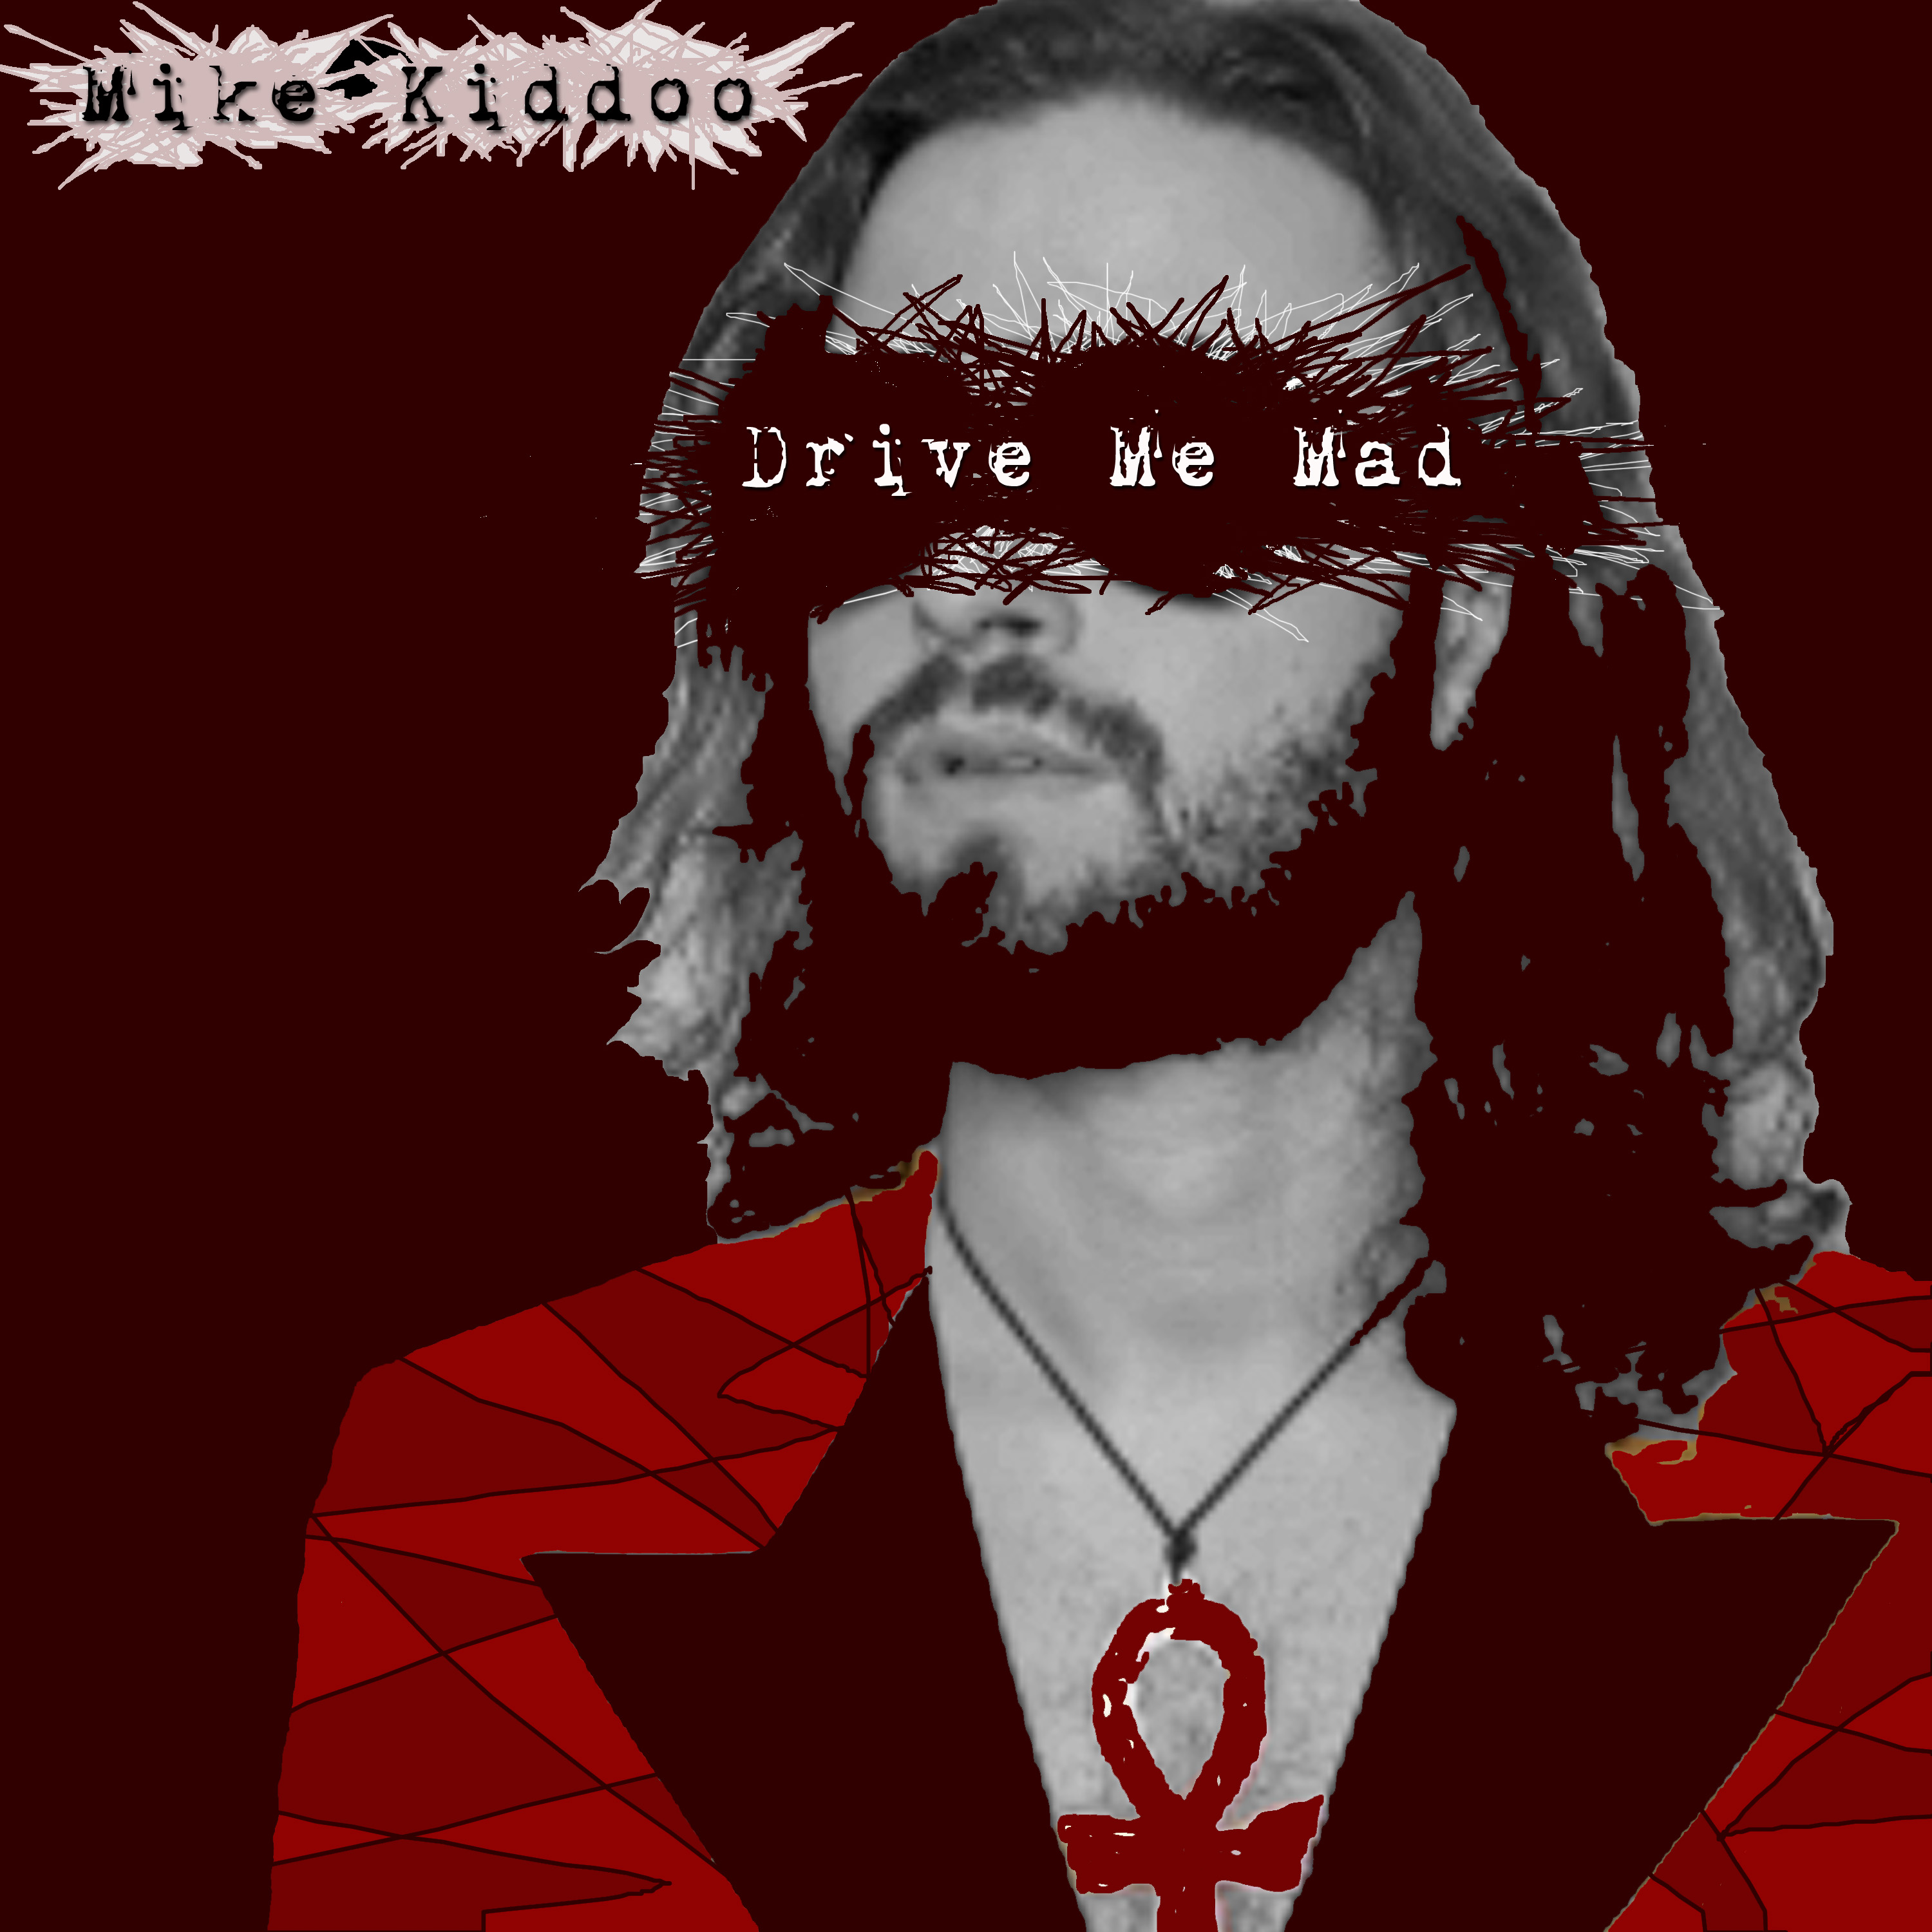 808-drive-me-mad-cover2.jpg